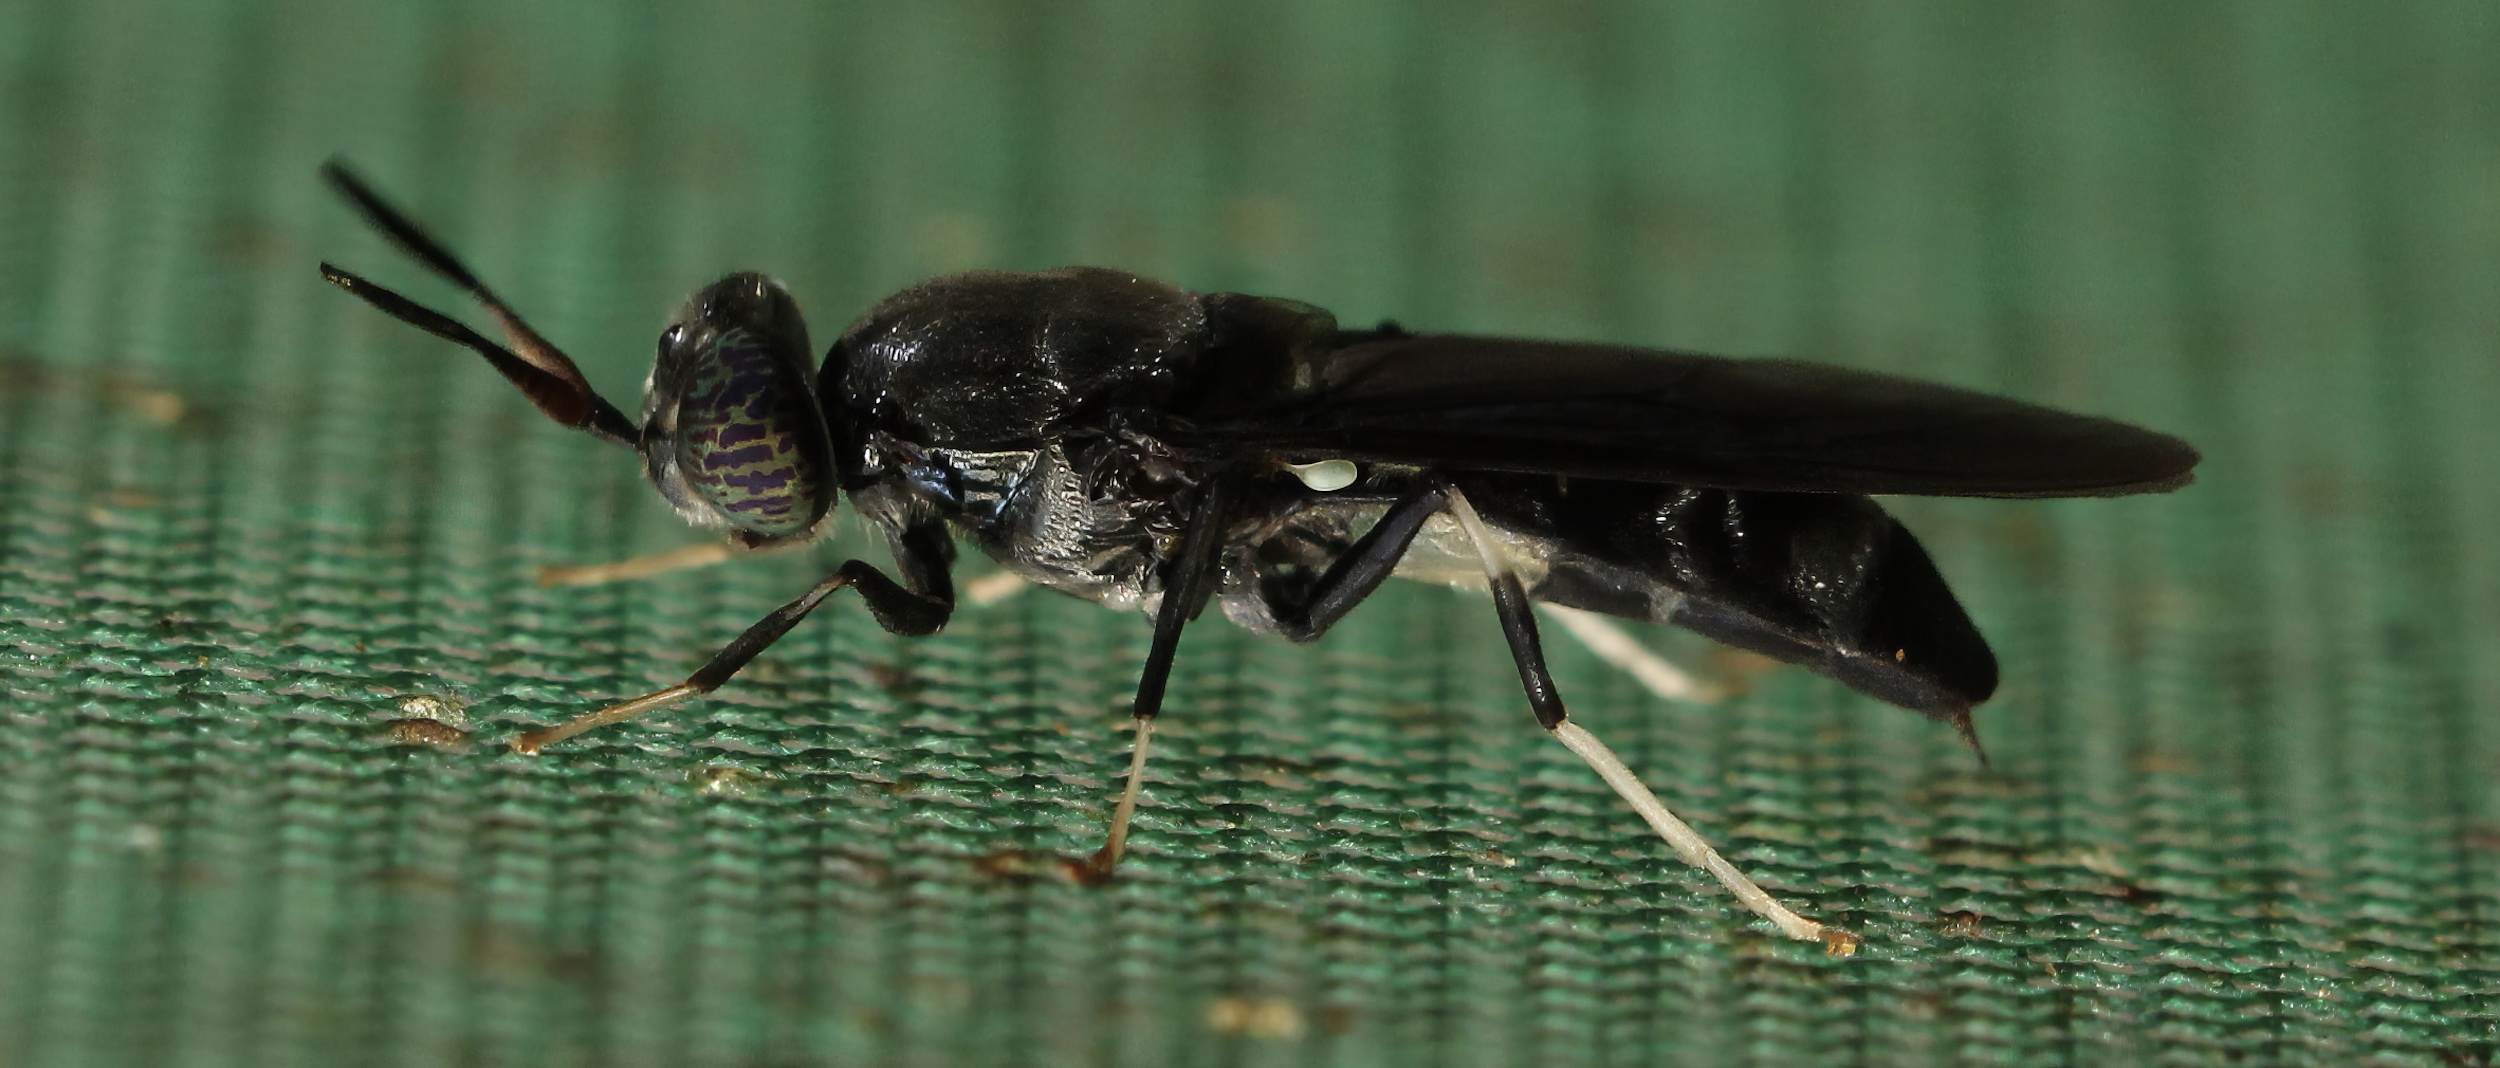 Close-up of a black fly seen from the side and staning on green shade-cloth netting.